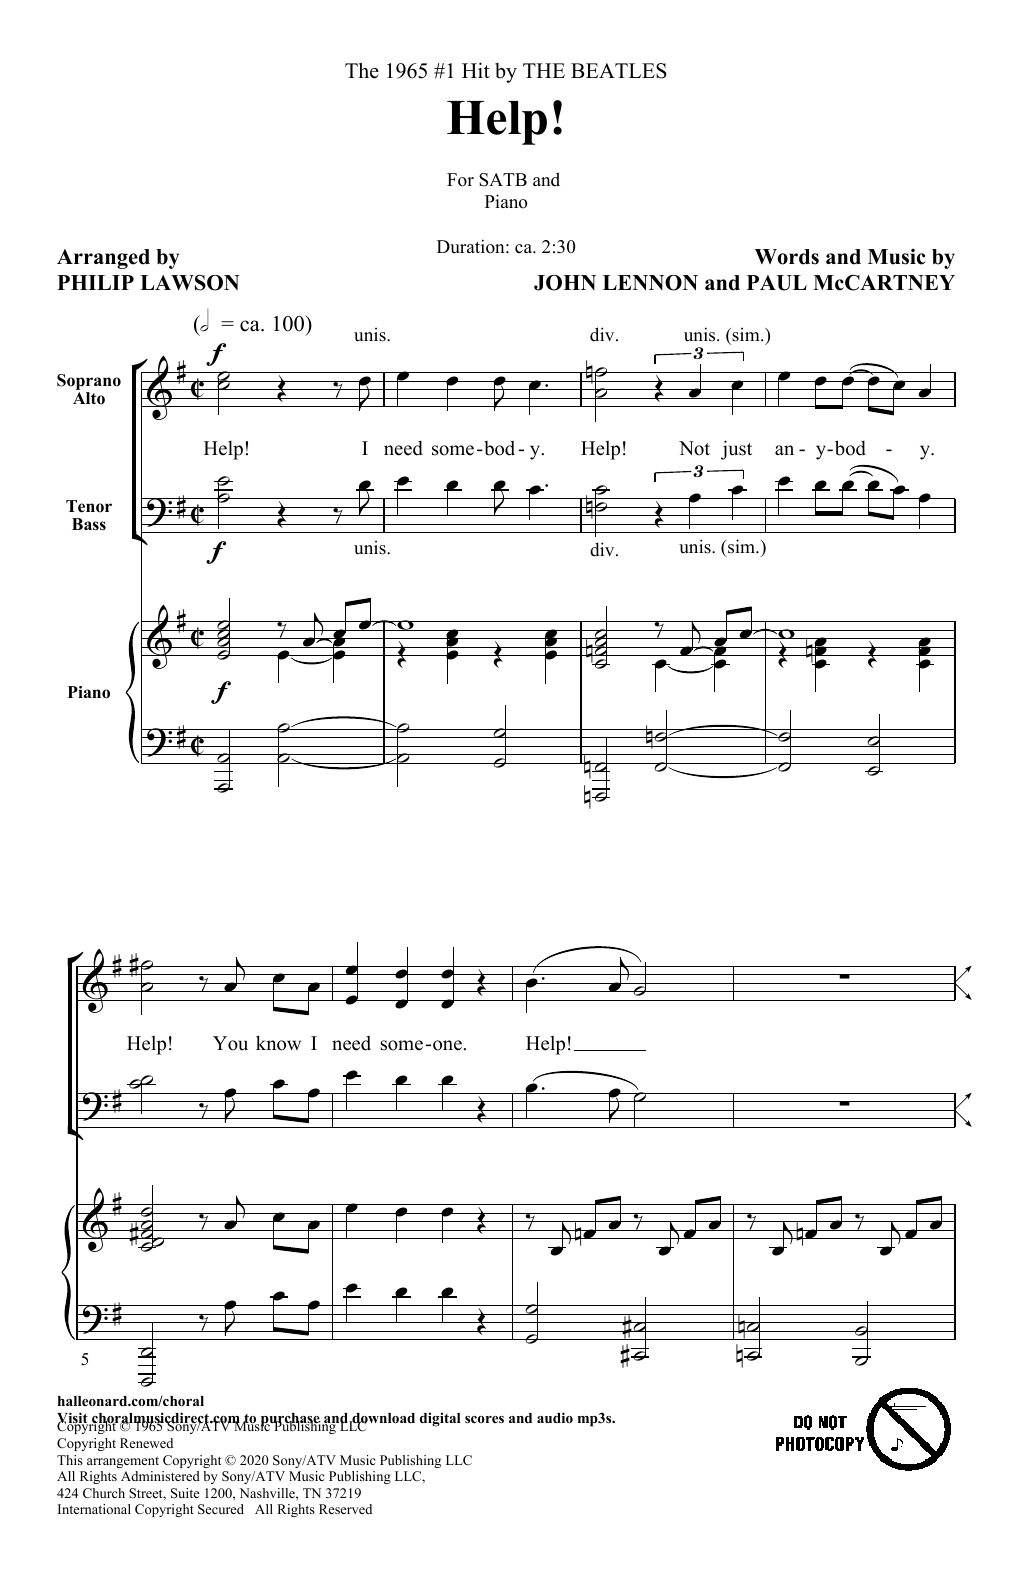 Download The Beatles Help! (arr. Philip Lawson) Sheet Music